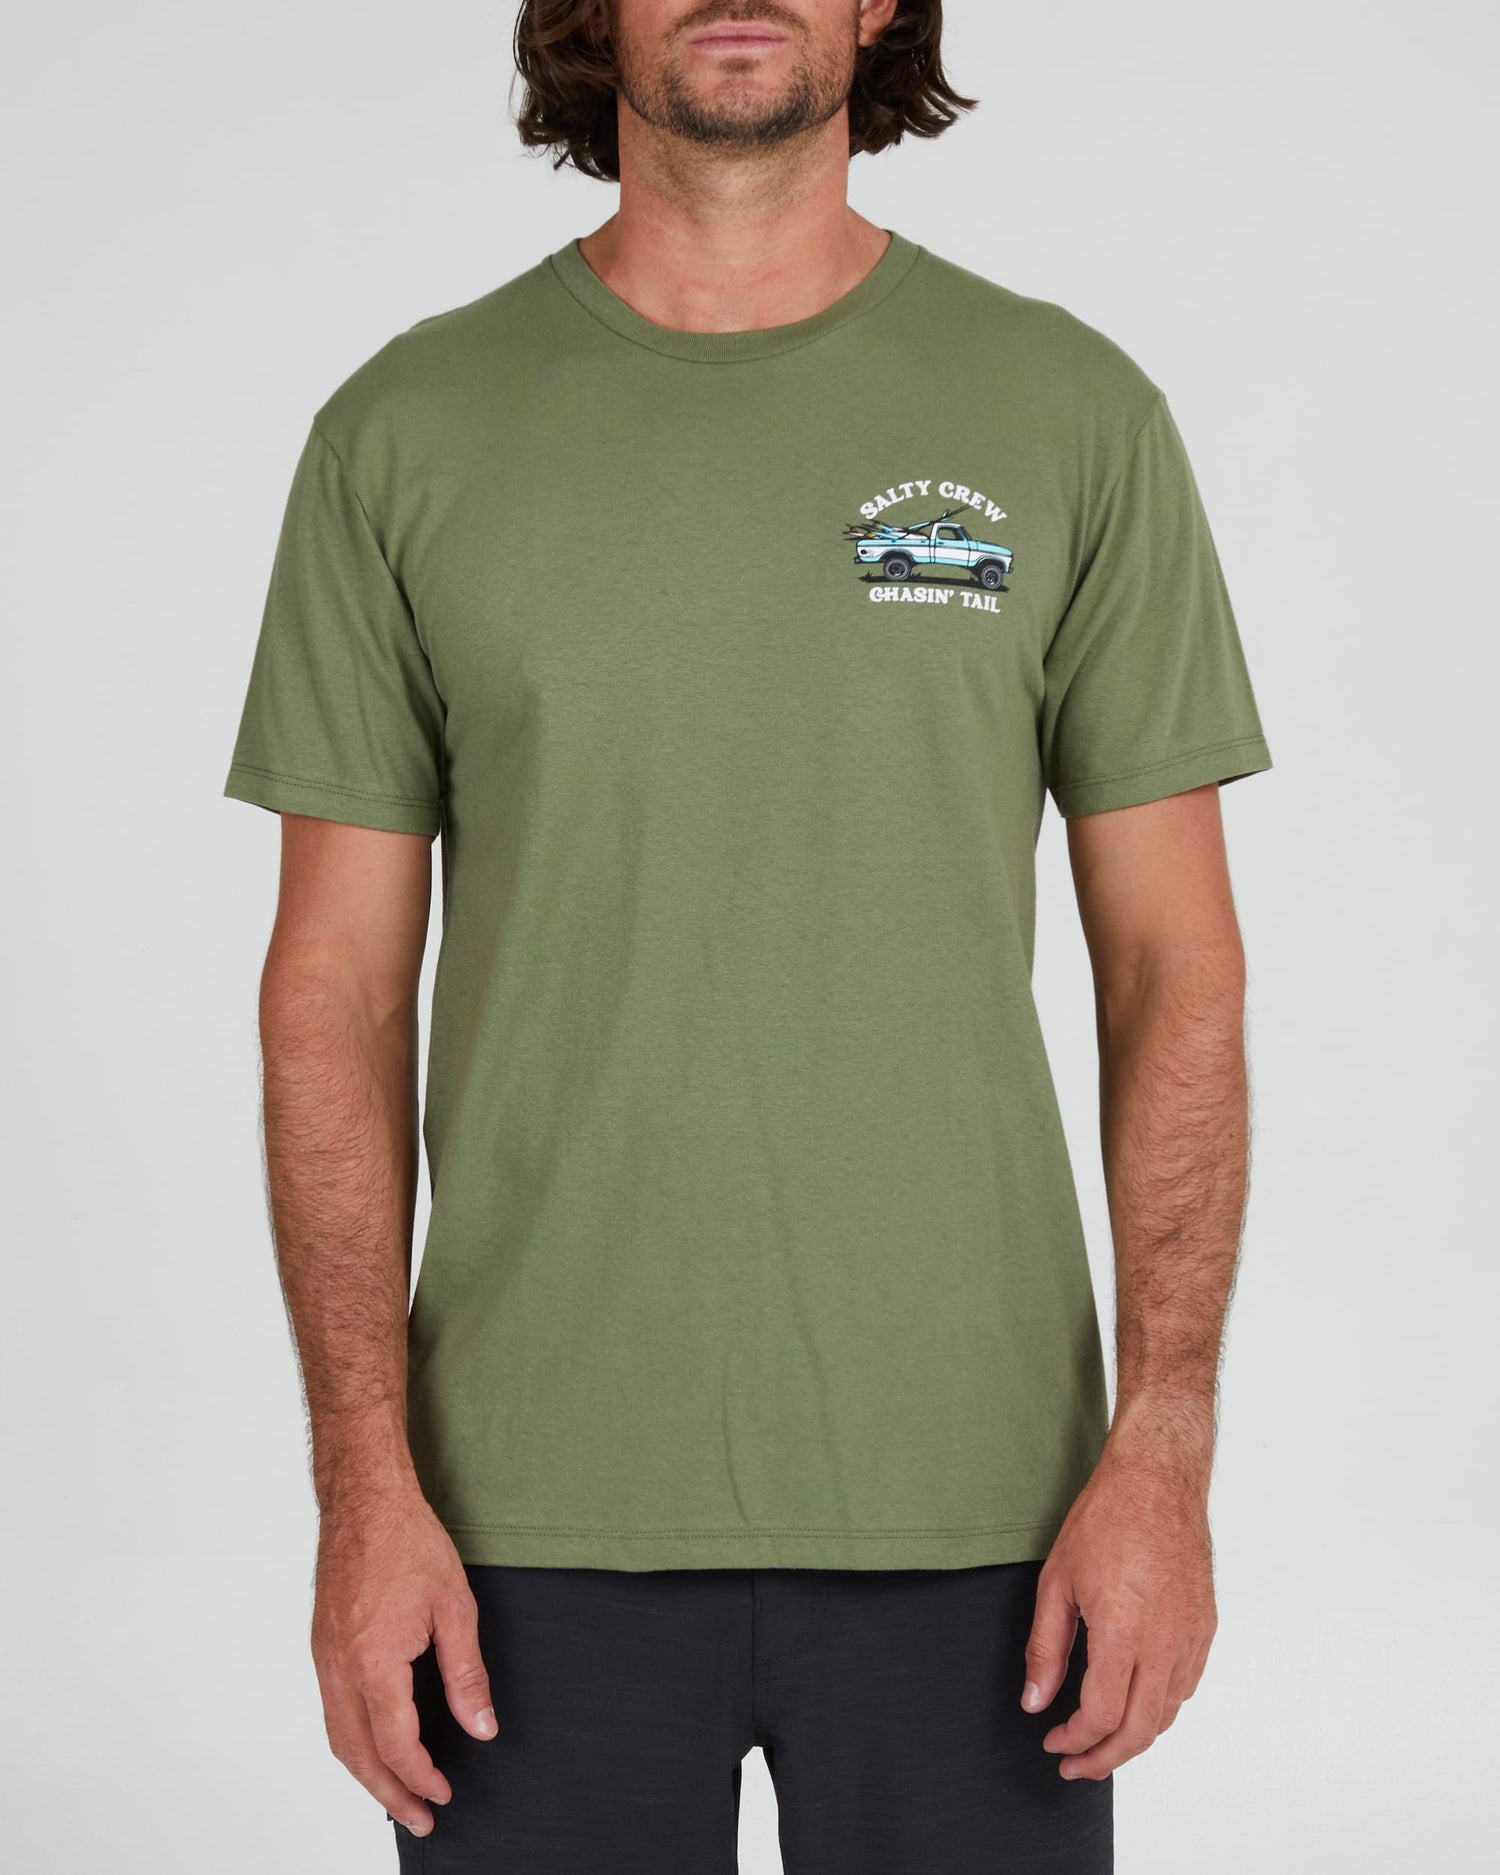 Salty crew T-SHIRTS S/S OFF ROAD PREMIUM S/S TEE - Sage green in Sage green